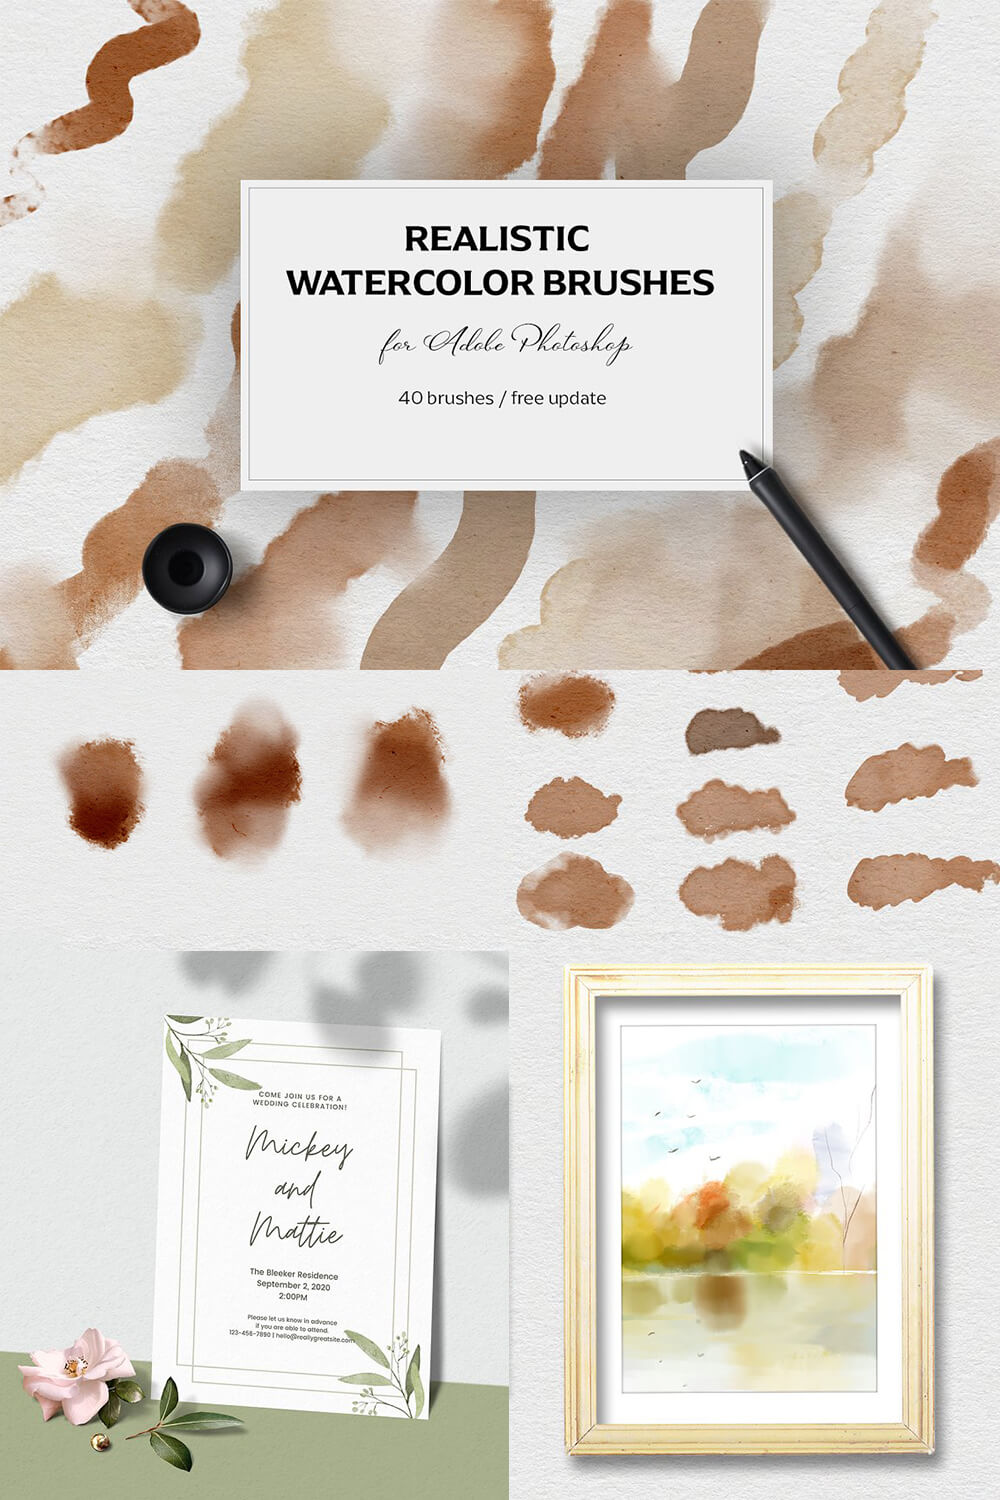 Realistic Watercolor Brushes for Adobe Photoshop.